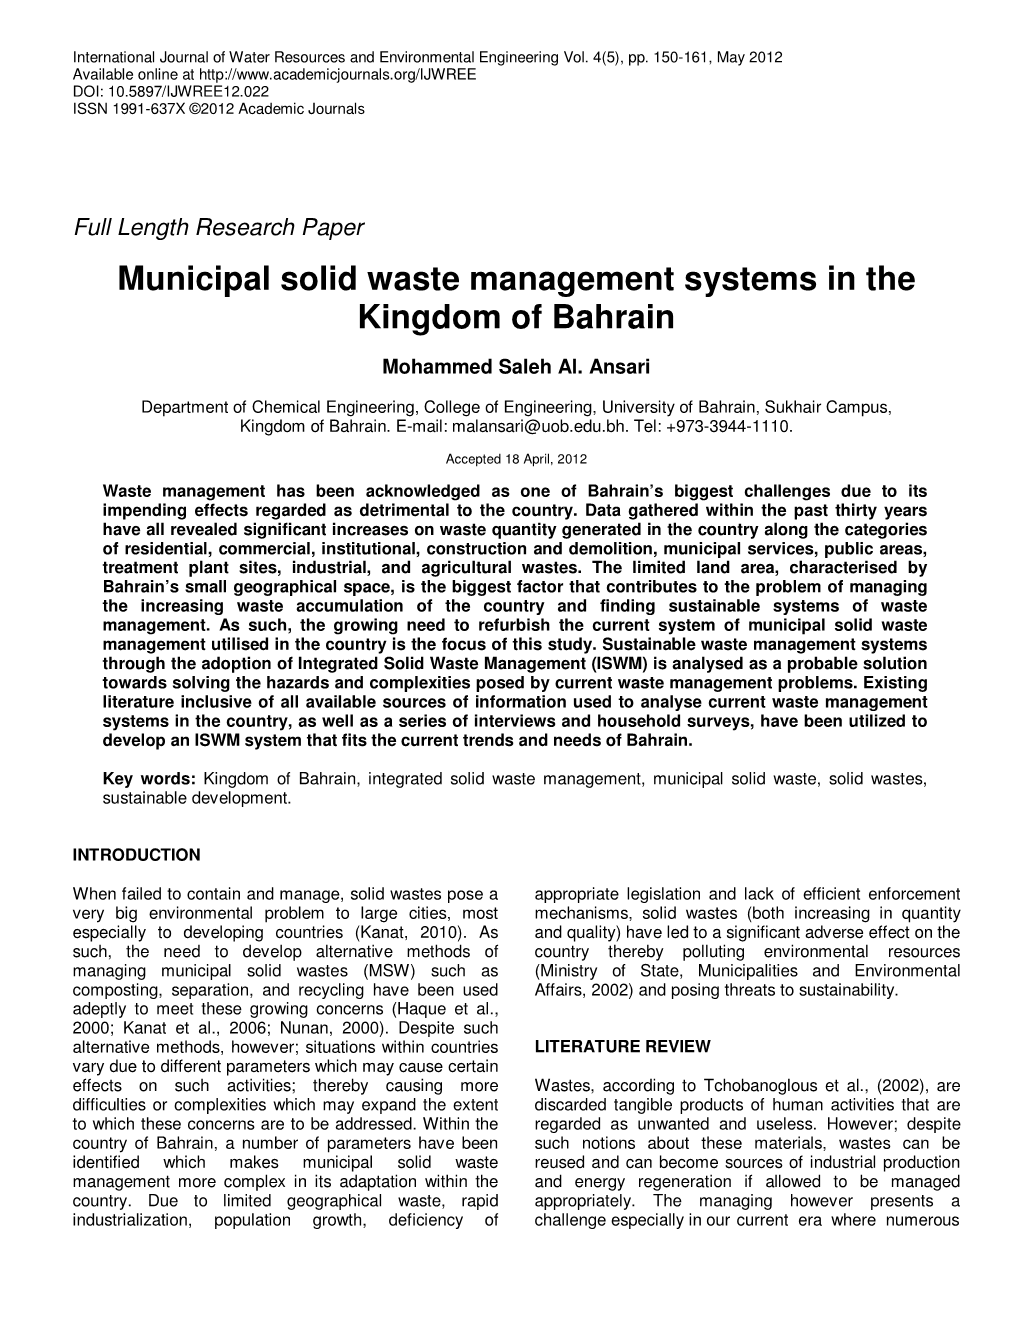 Municipal Solid Waste Management Systems in the Kingdom of Bahrain